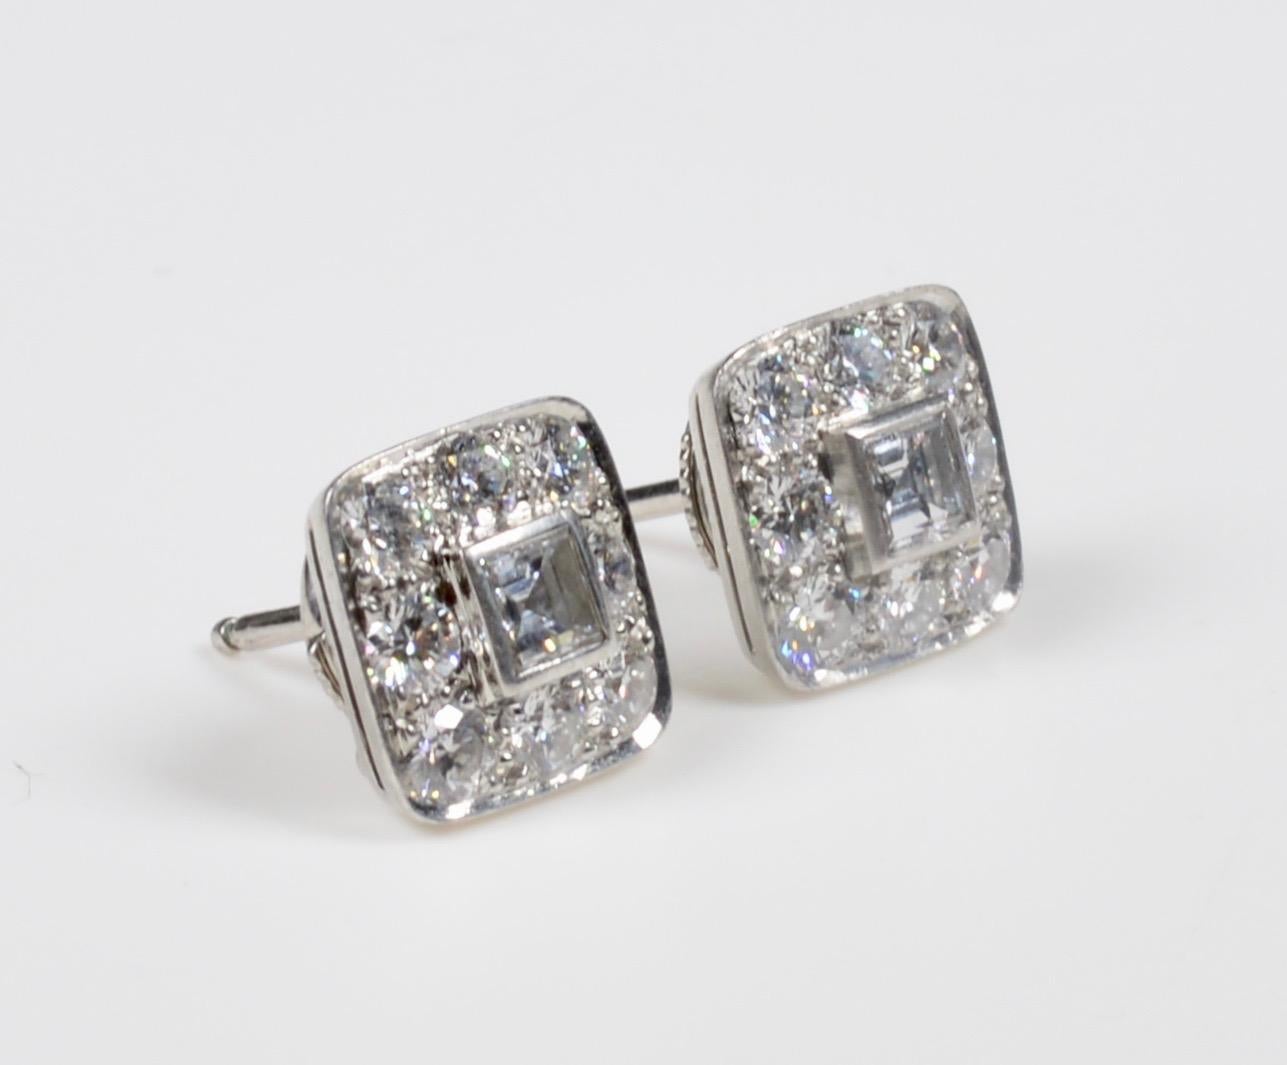 A Tiffany & Co. pair of platinum and diamond earrings, containing two square step cut diamonds weighing approximately 0.30 carat each and 16 round brilliant cut diamonds weighing approximately 0.96 carat. Toral Carat approximately is 2.4
Stamp: